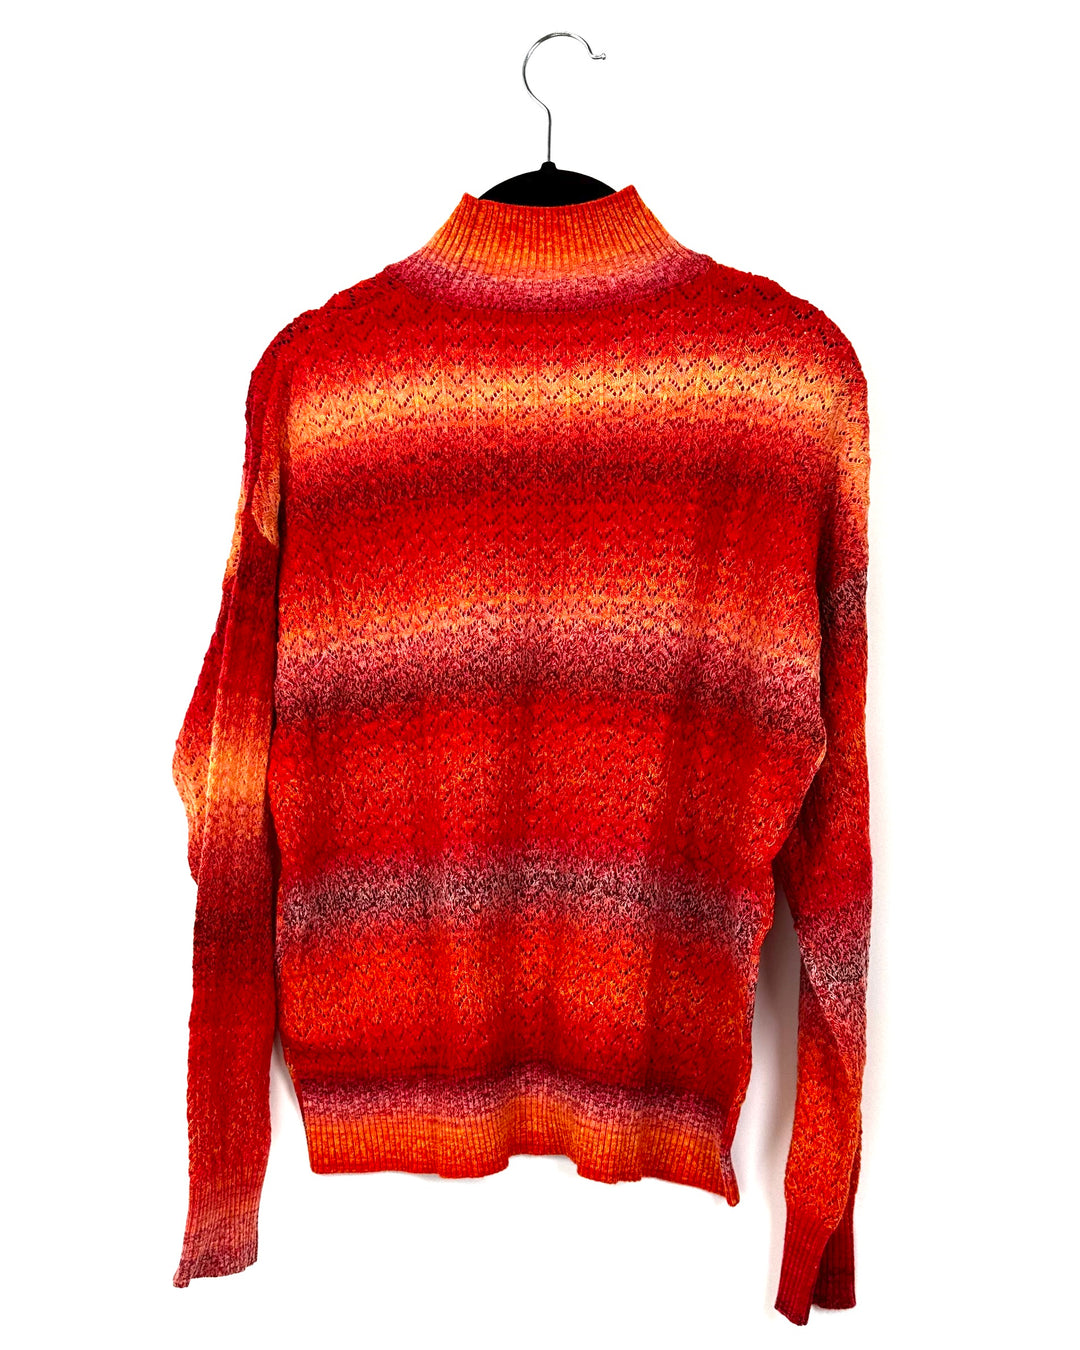 Red Gradient Knit Turtleneck Sweater - Small